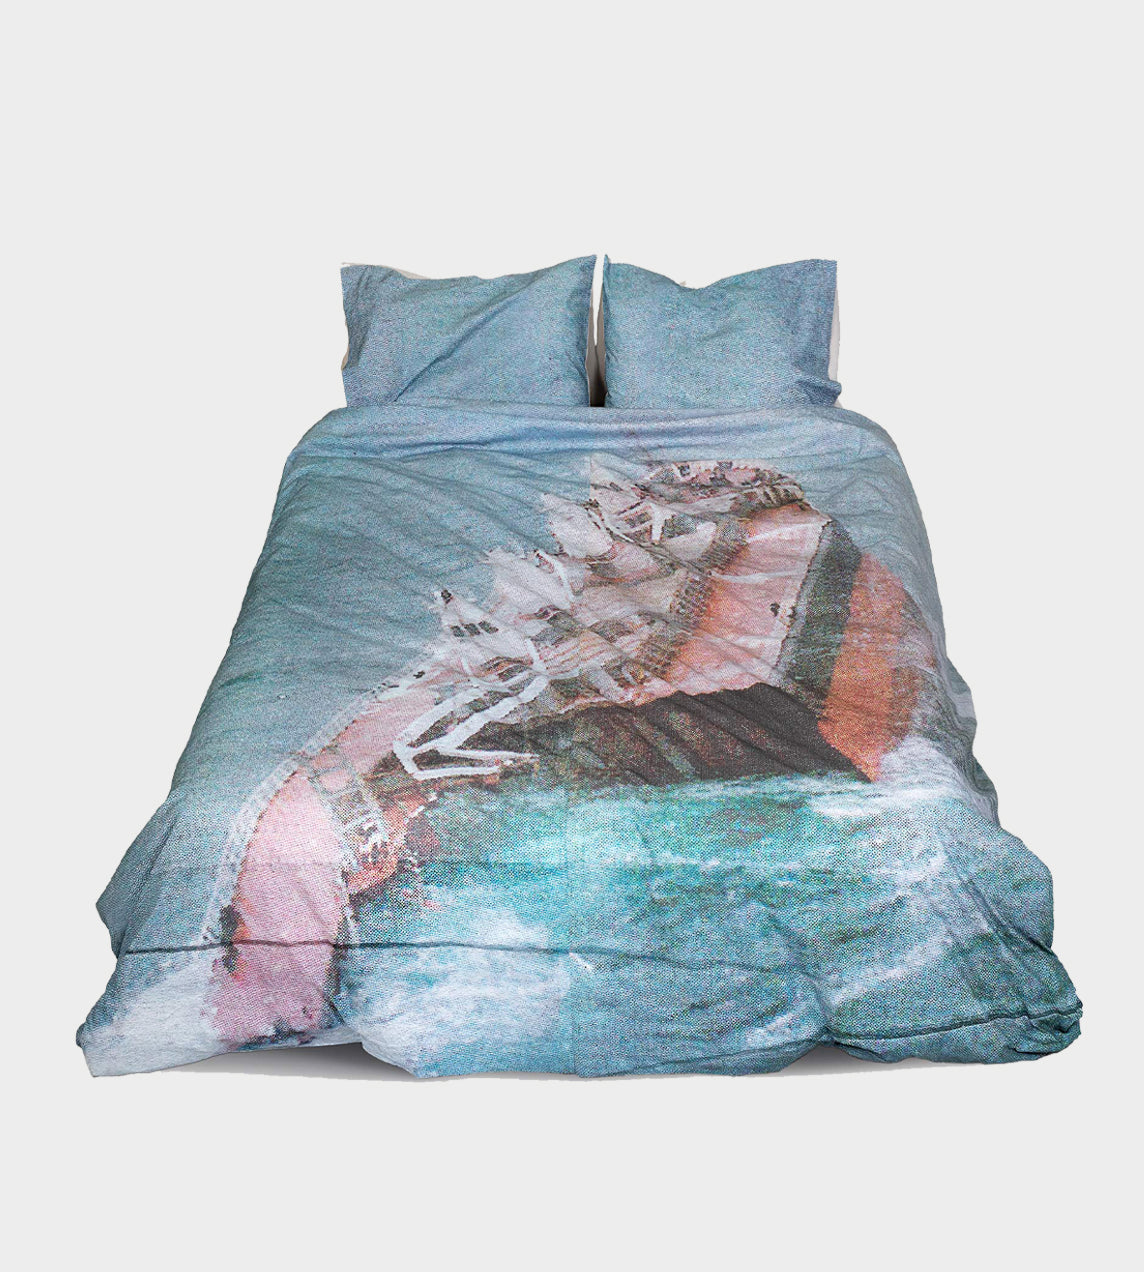 Serapis - 'Flare' Queen Bed Sheets